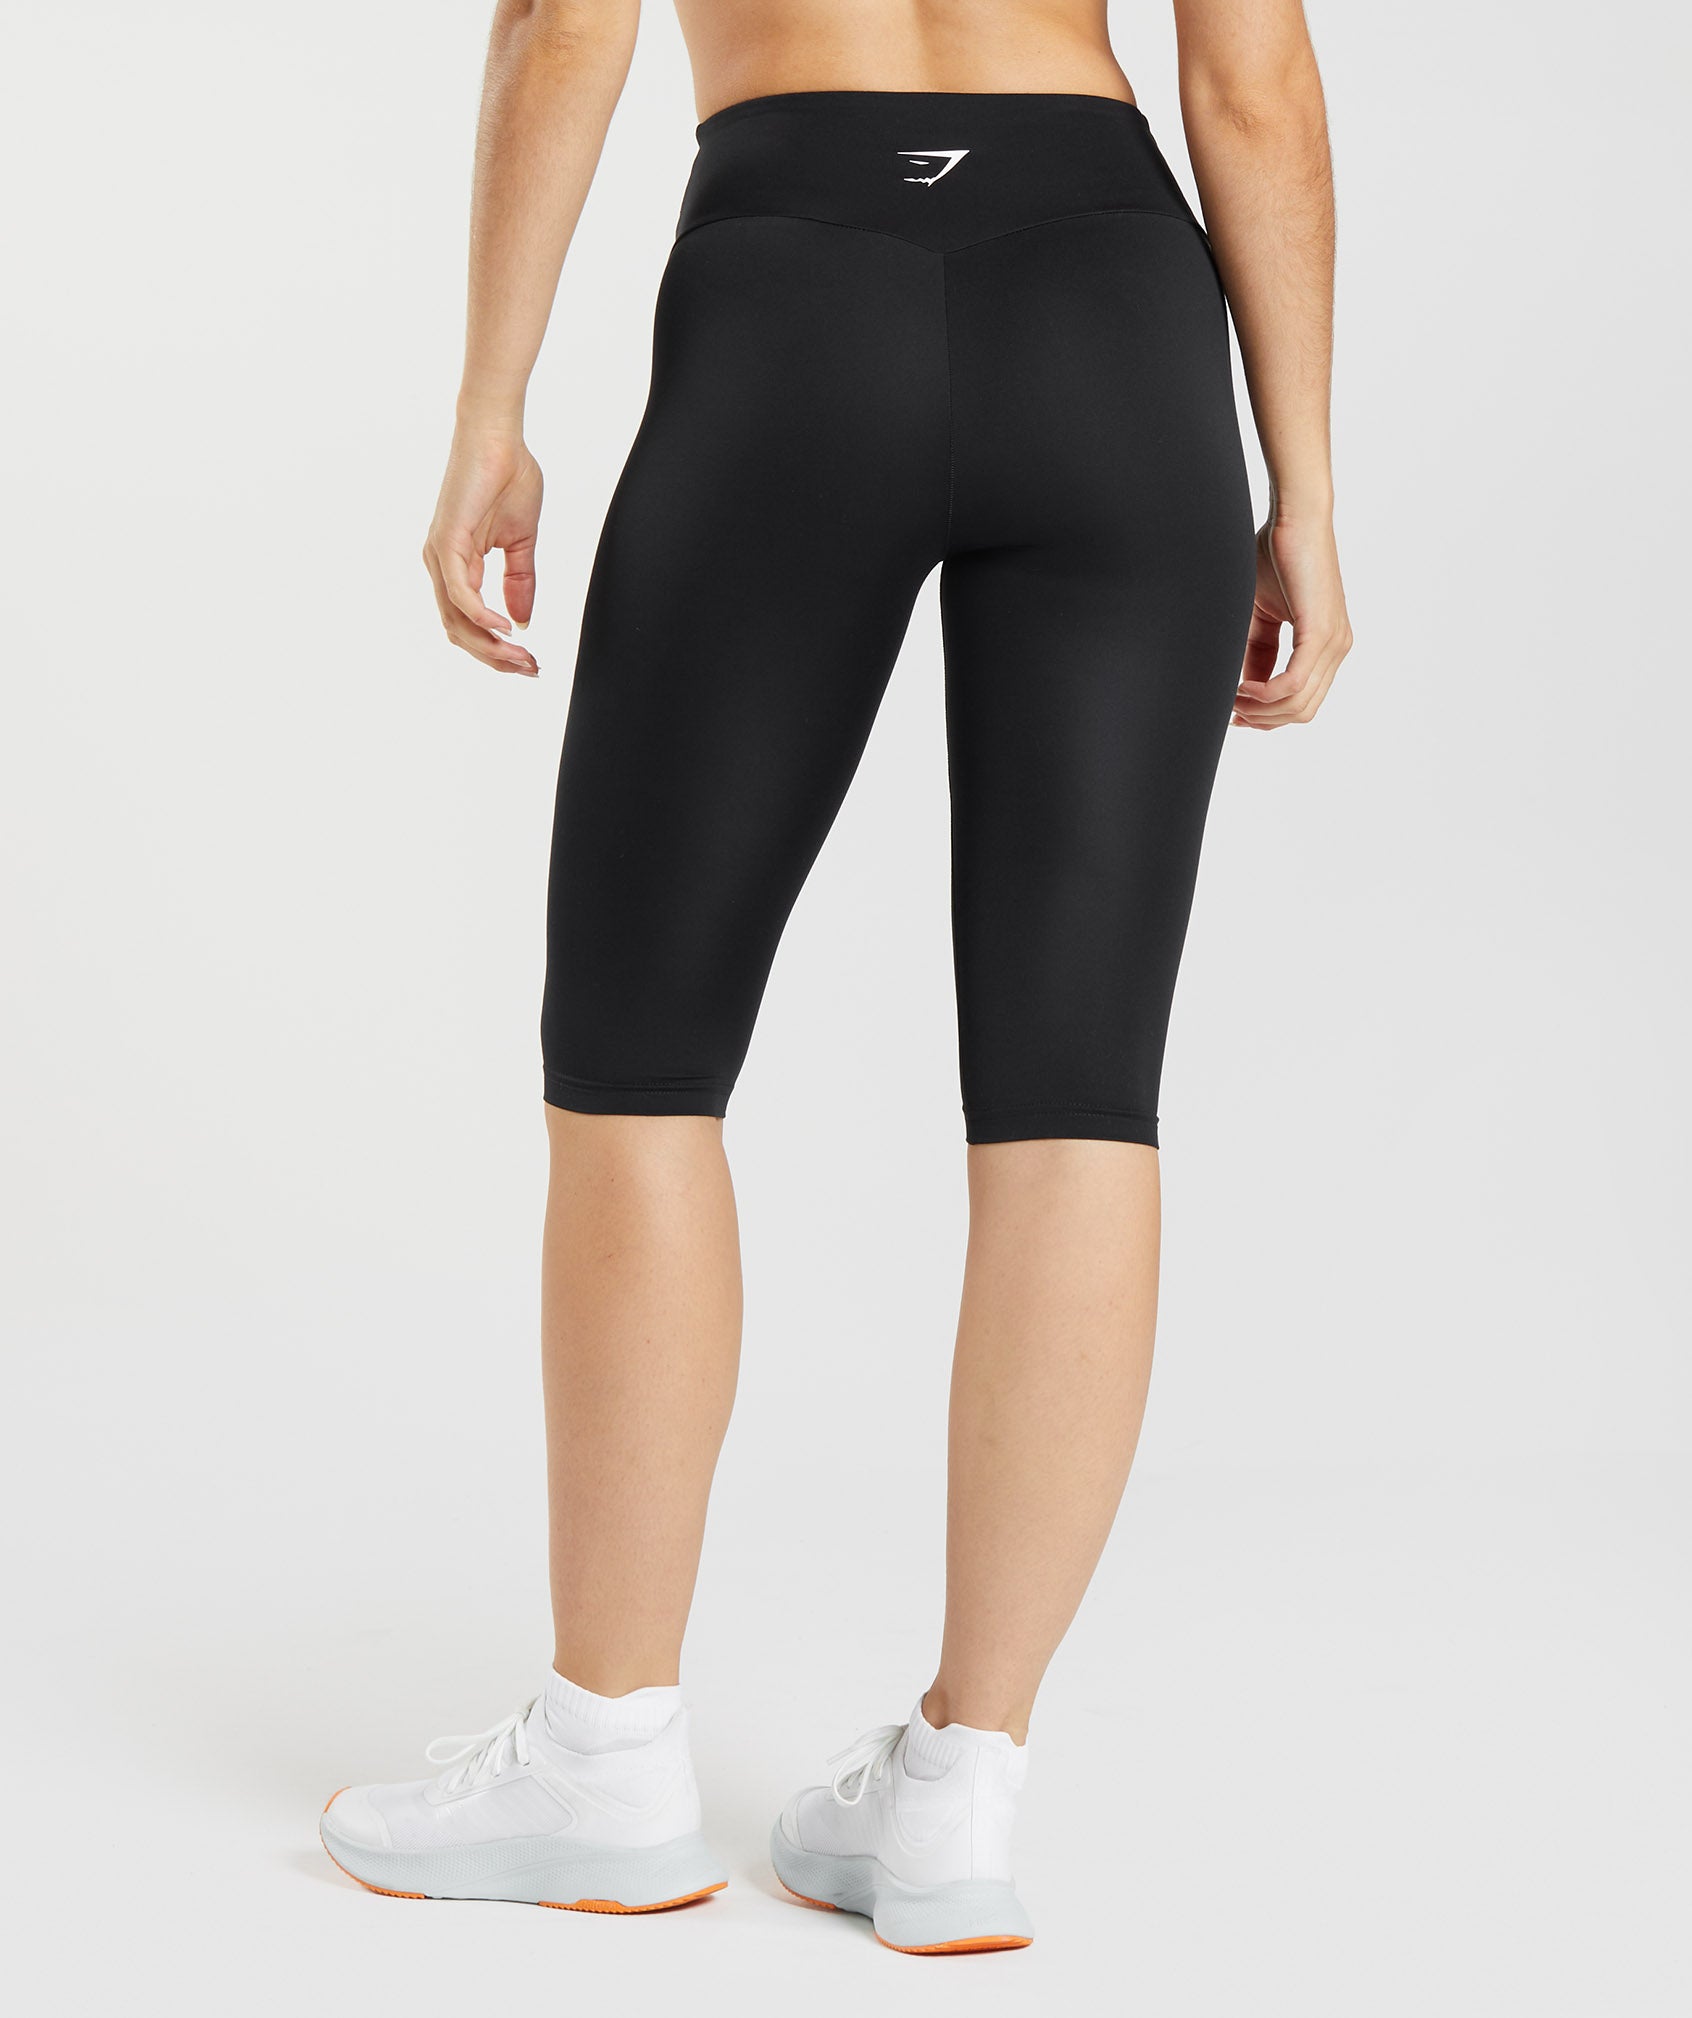 Gymshark Activewear Cropped Leggings Women's Small? Compression Capri Pants  Blue : r/gym_apparel_for_women